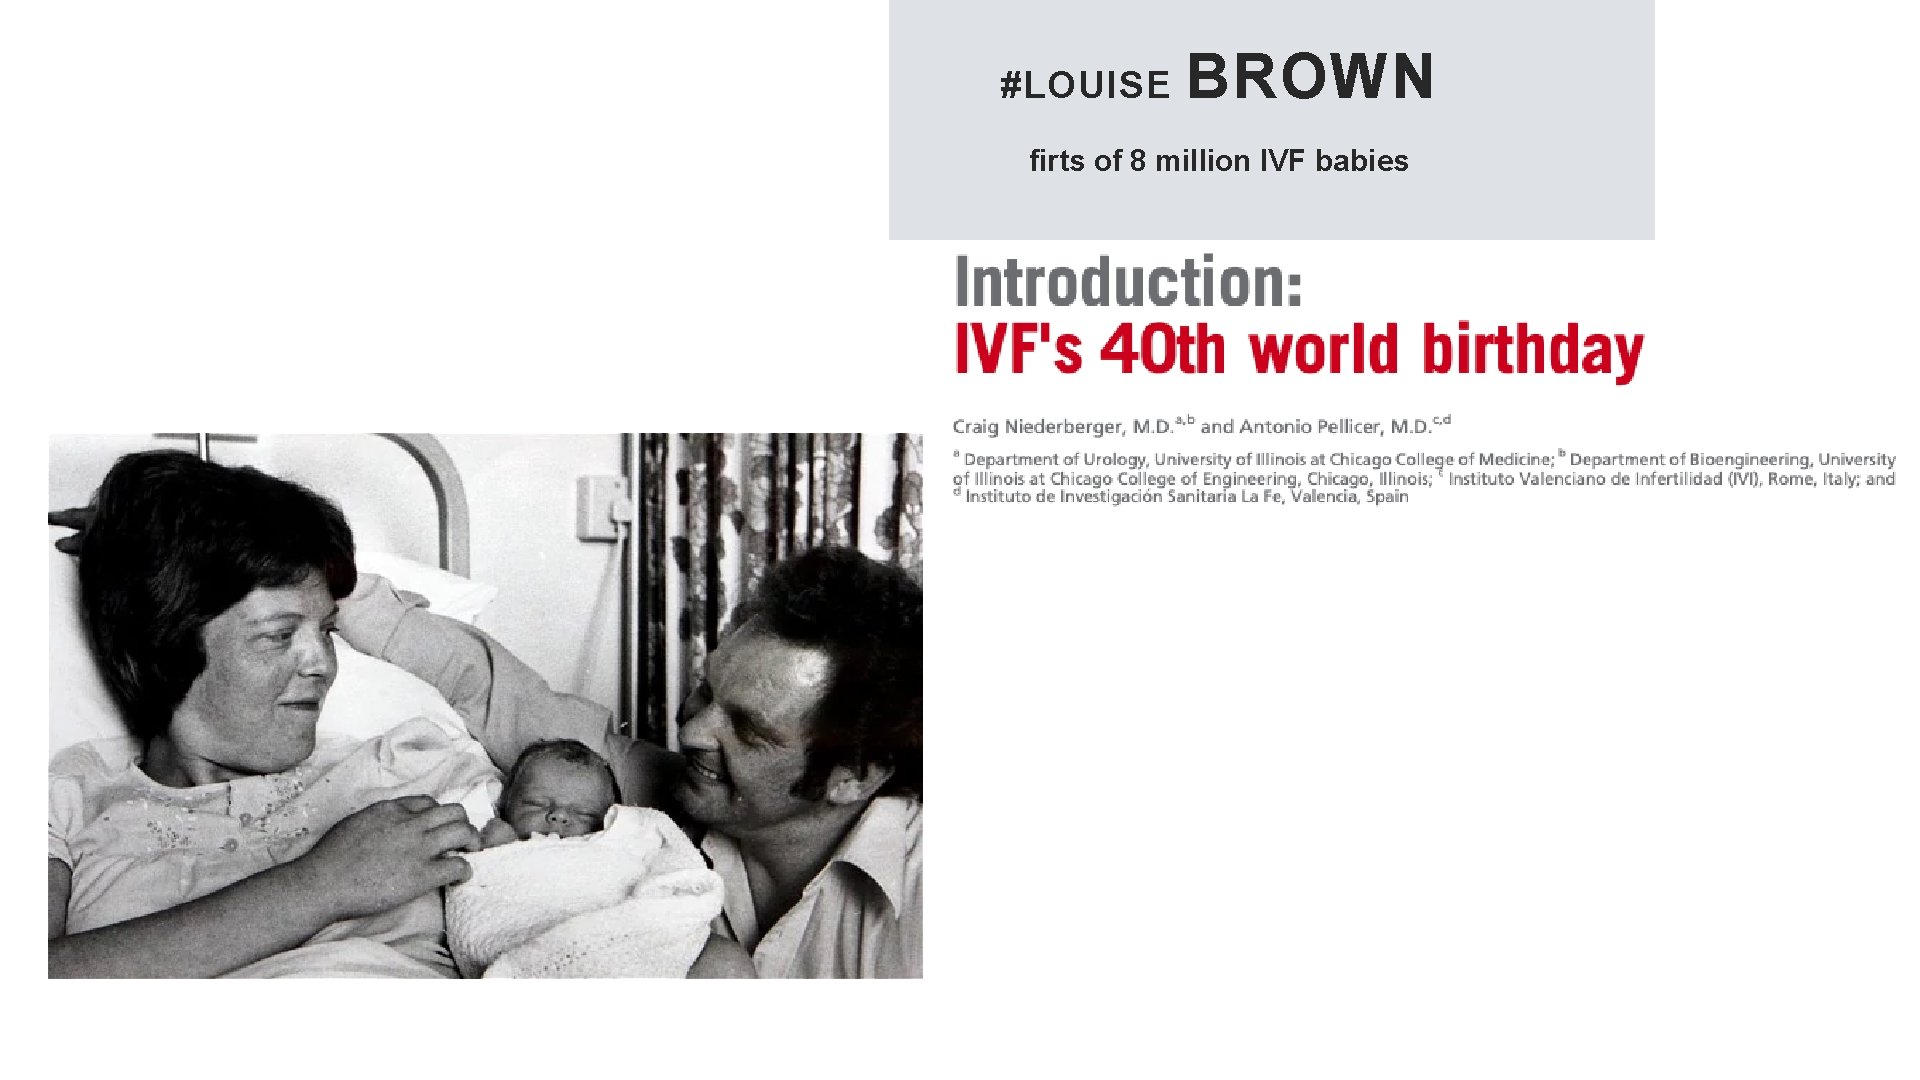 #LOUISE BROWN firts of 8 million IVF babies 